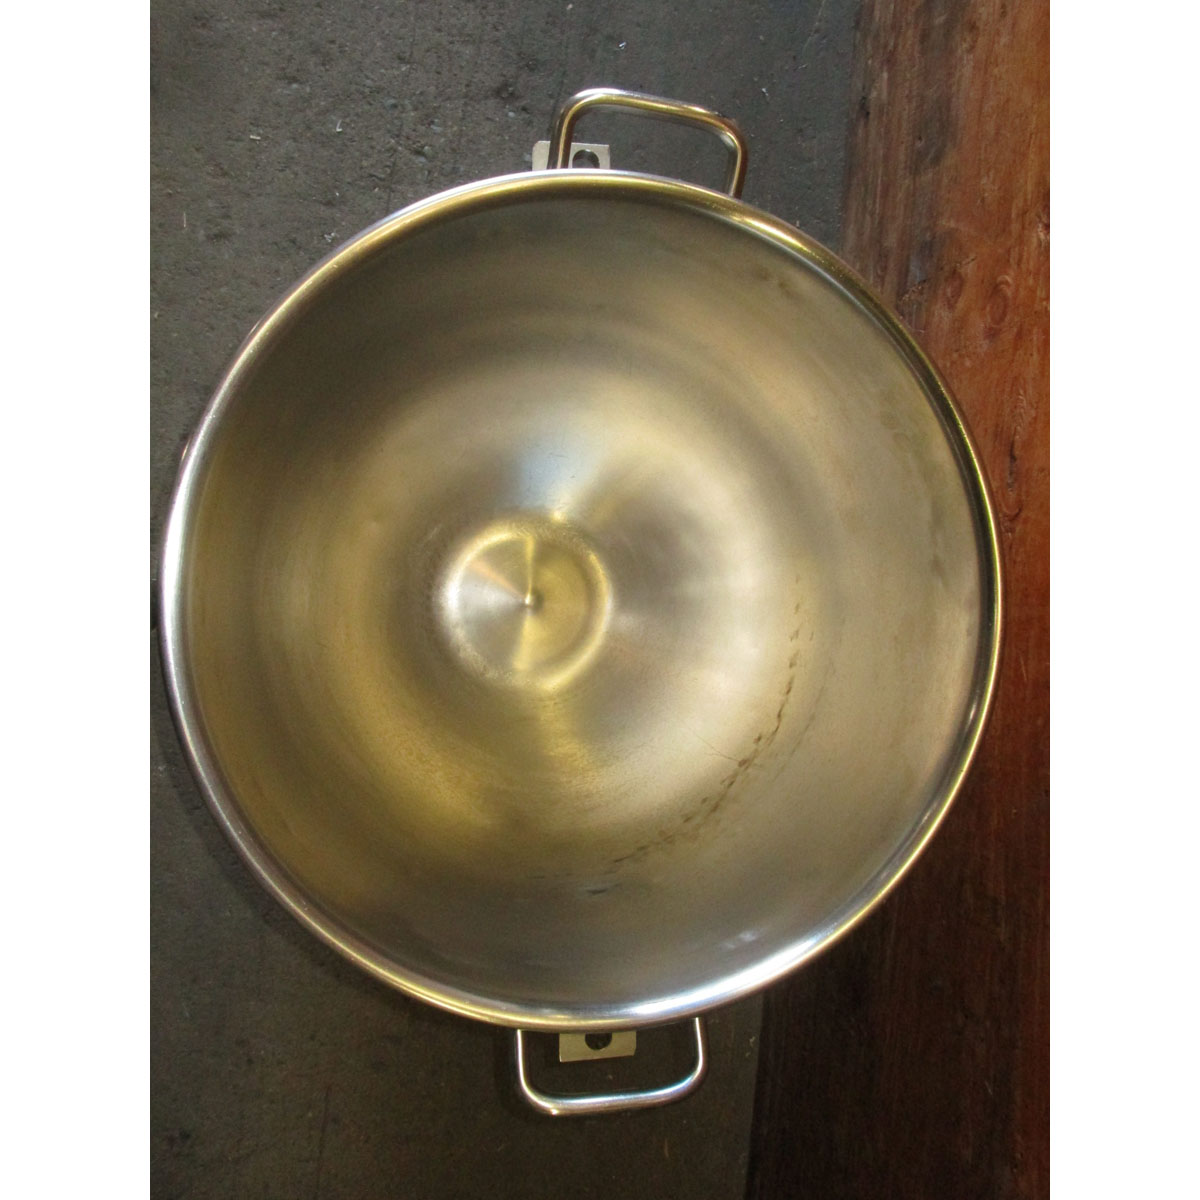 Hobart BOWL-HL60 StainlessSteel 60 Qt Bowl For HL600, Used Great Condition image 1